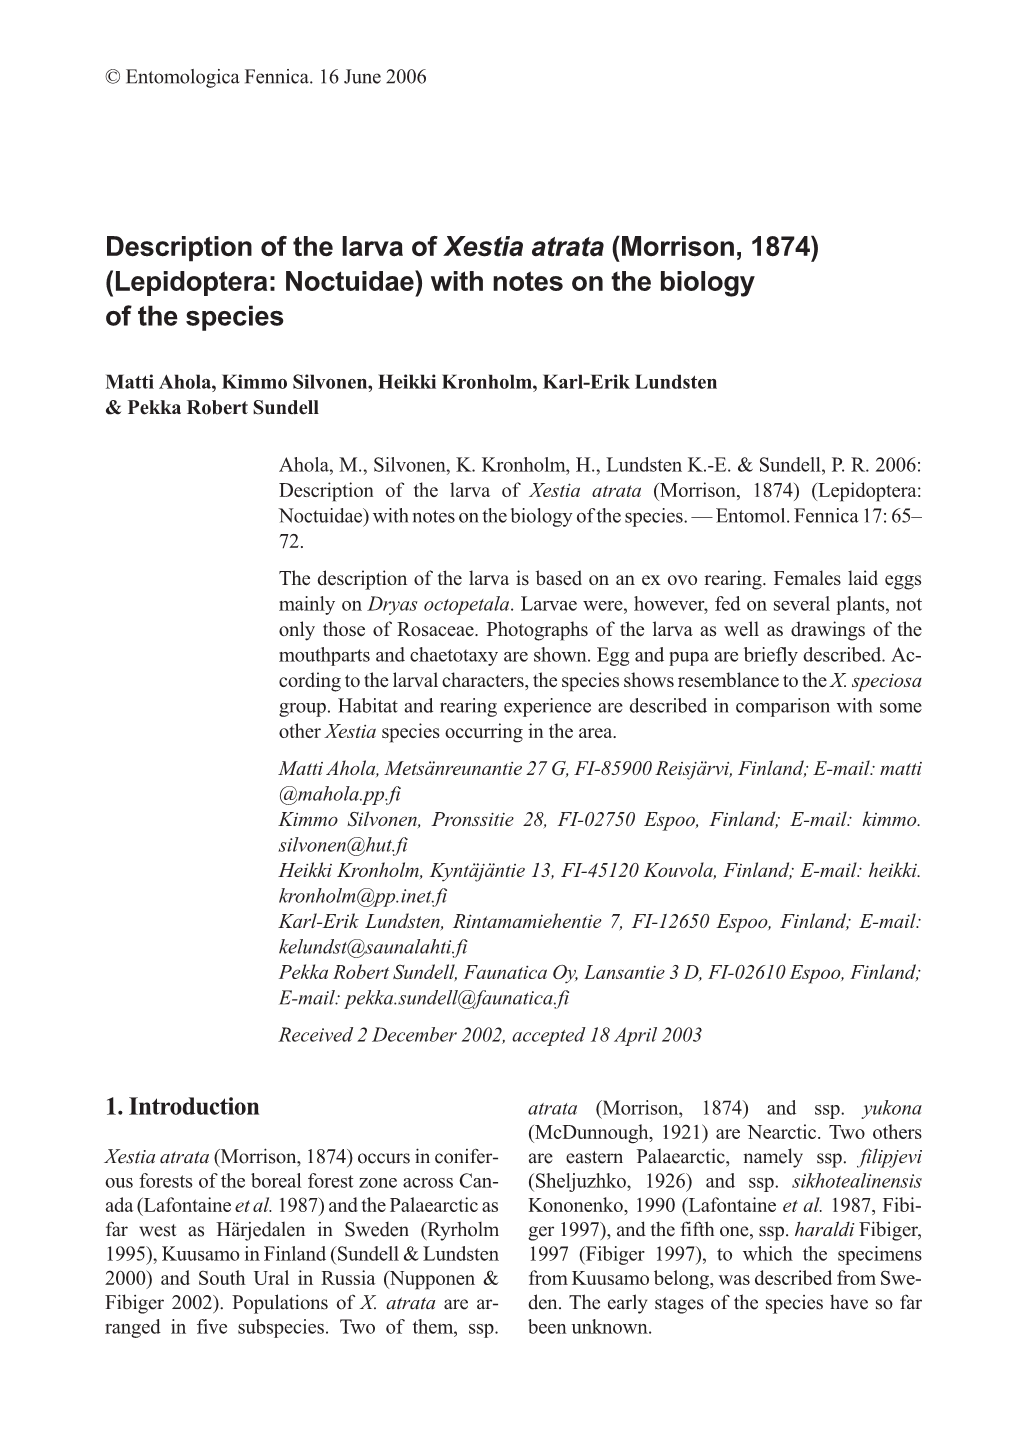 Description of the Larva of Xestia Atrata (Morrison, 1874) (Lepidoptera: Noctuidae) with Notes on the Biology of the Species